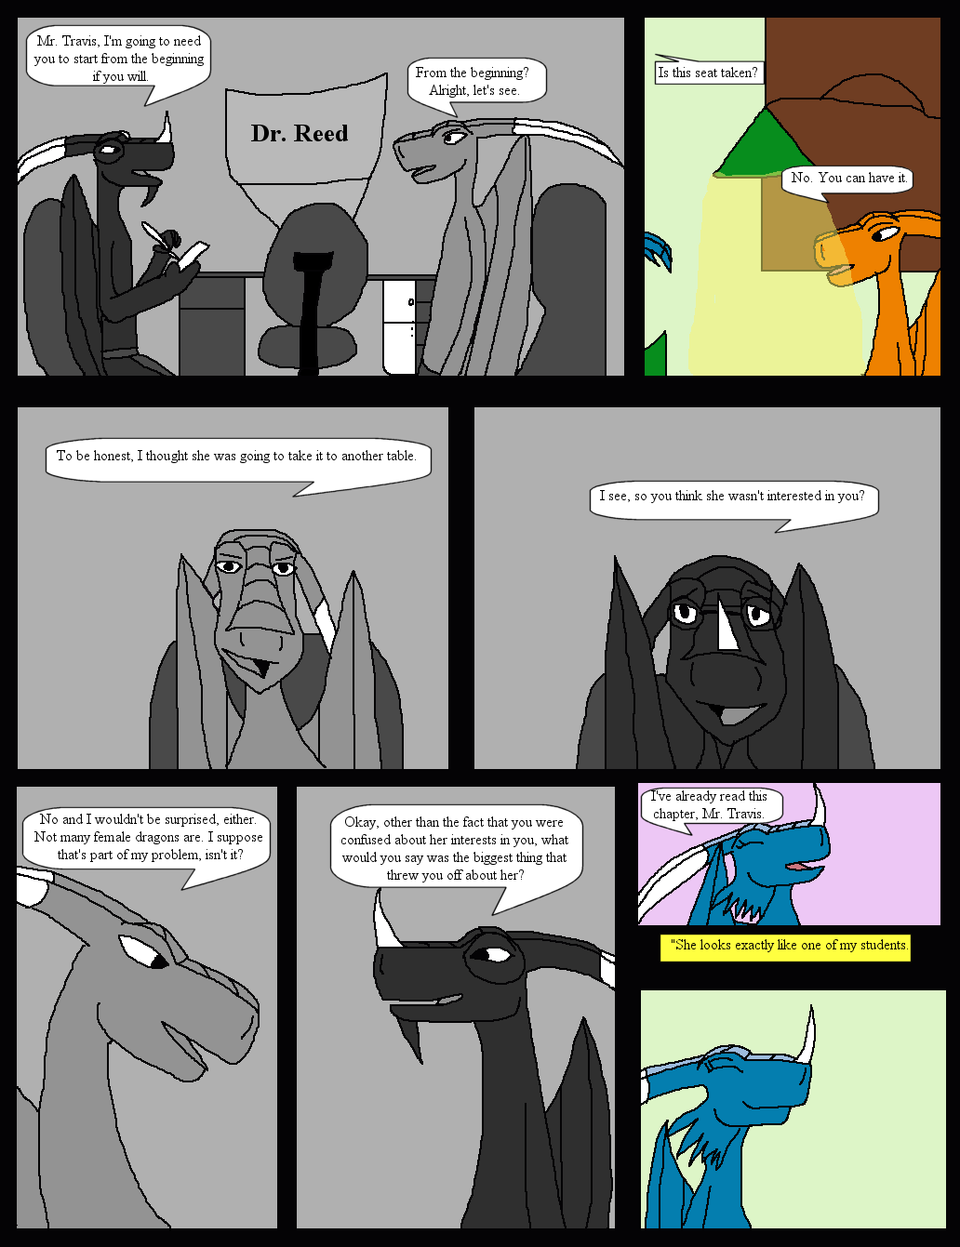 Chapter One: The Doppleganger (Page 2 of 11)